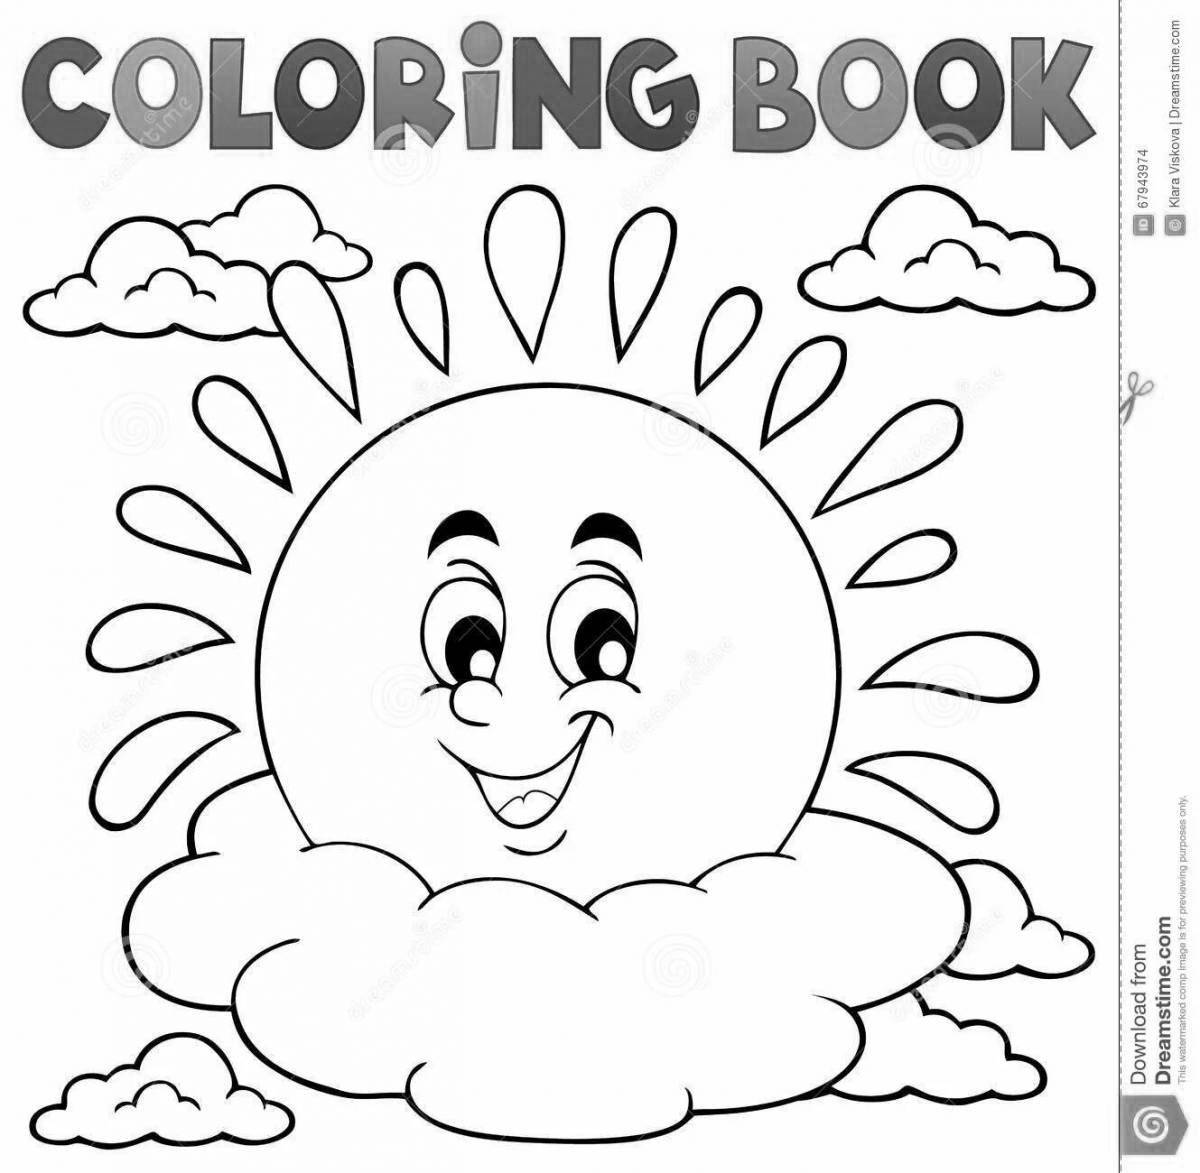 Coloring book holiday sun